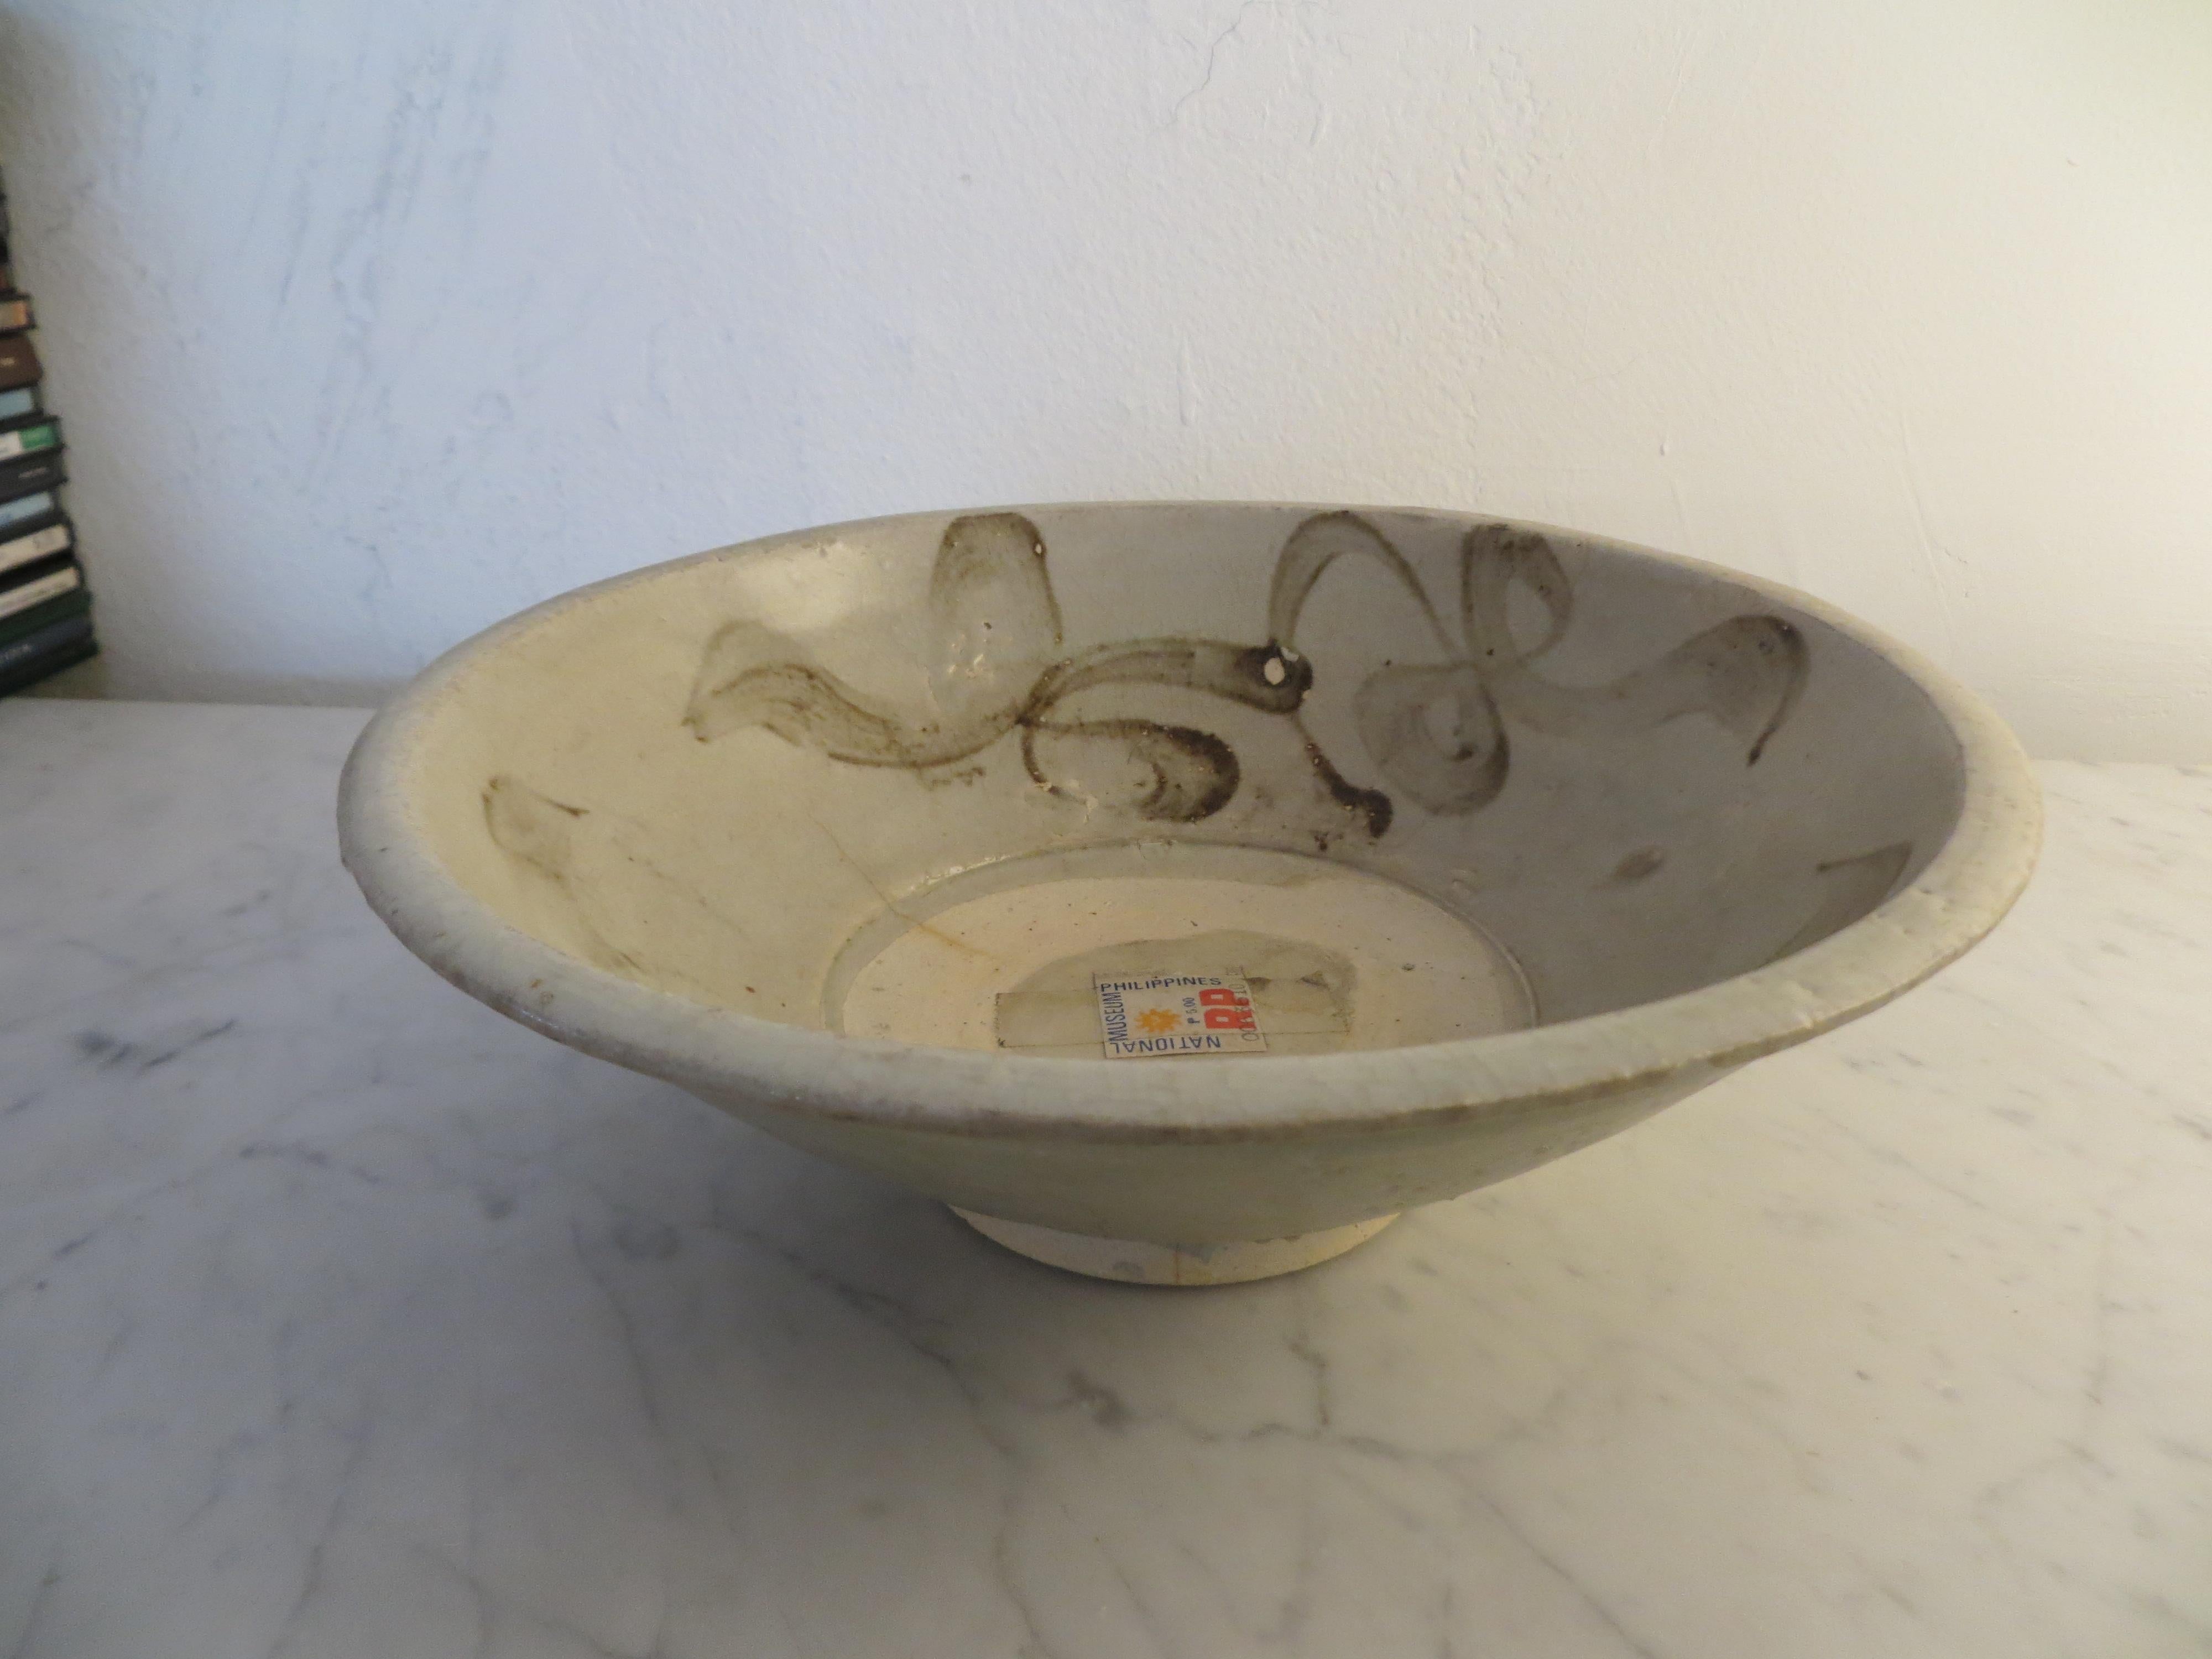 Antique stoneware Chines bowl. We are not sure of the period, could be Sung or Yuan Ming.
It was purchased in the Philippines about 15 years and it has an authenticity sticker label from the Philippines National Museum.
The bowl has a viable 2